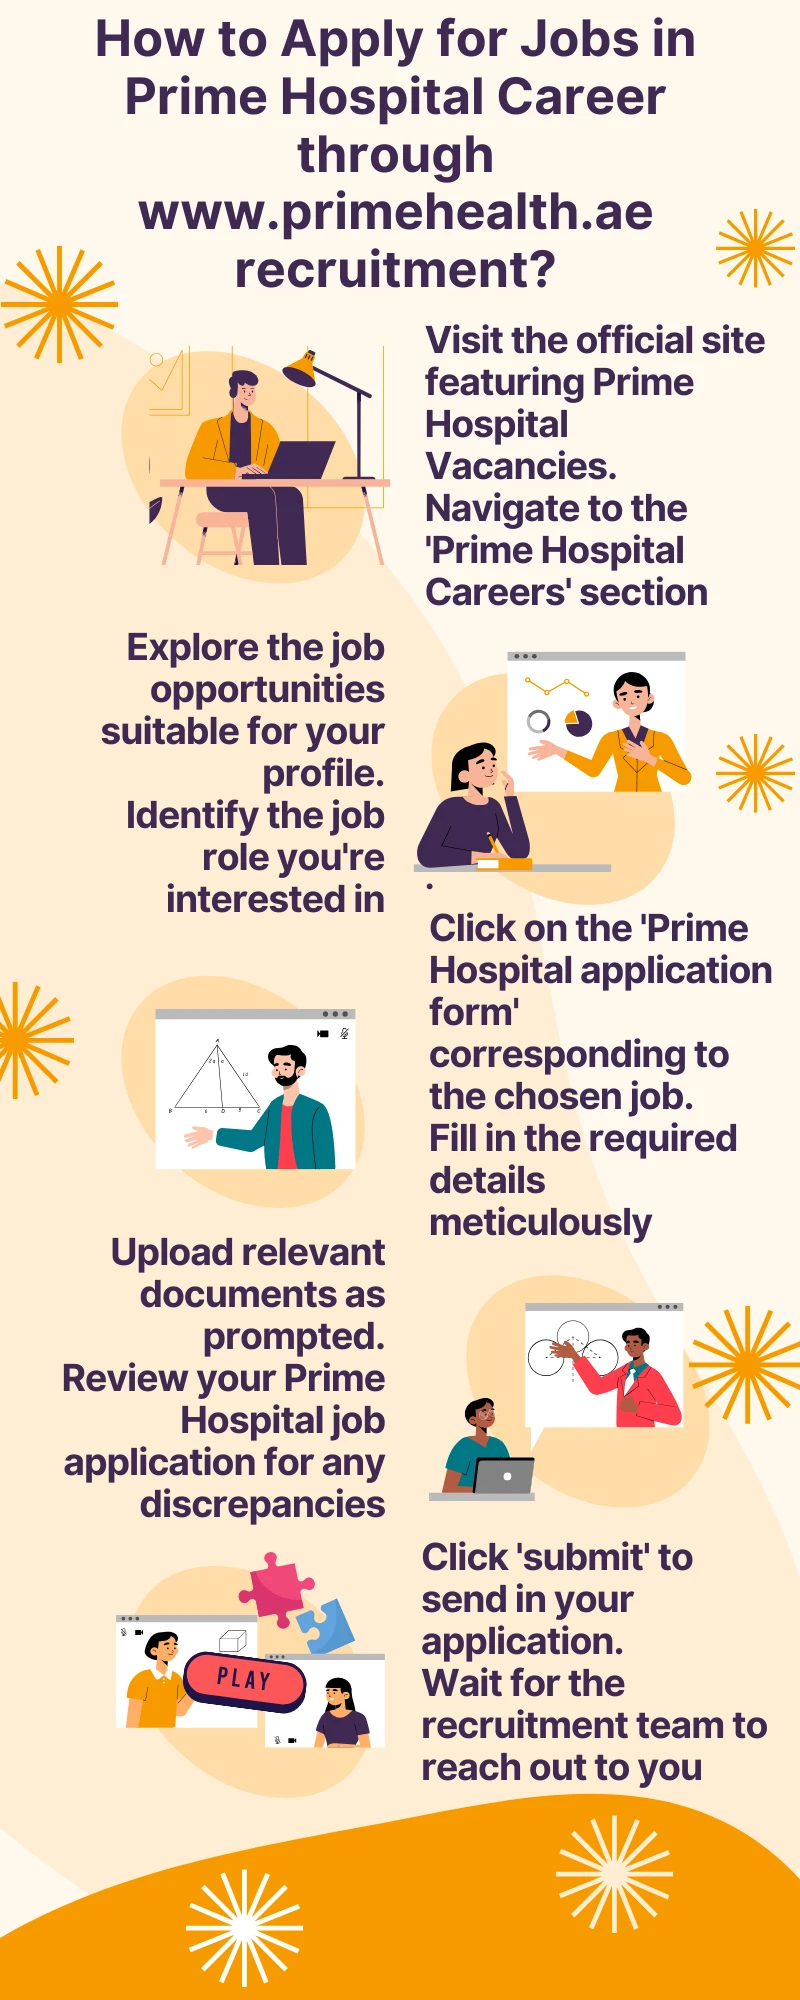 How to Apply for Jobs in Prime Hospital Career through www.primehealth.ae recruitment?